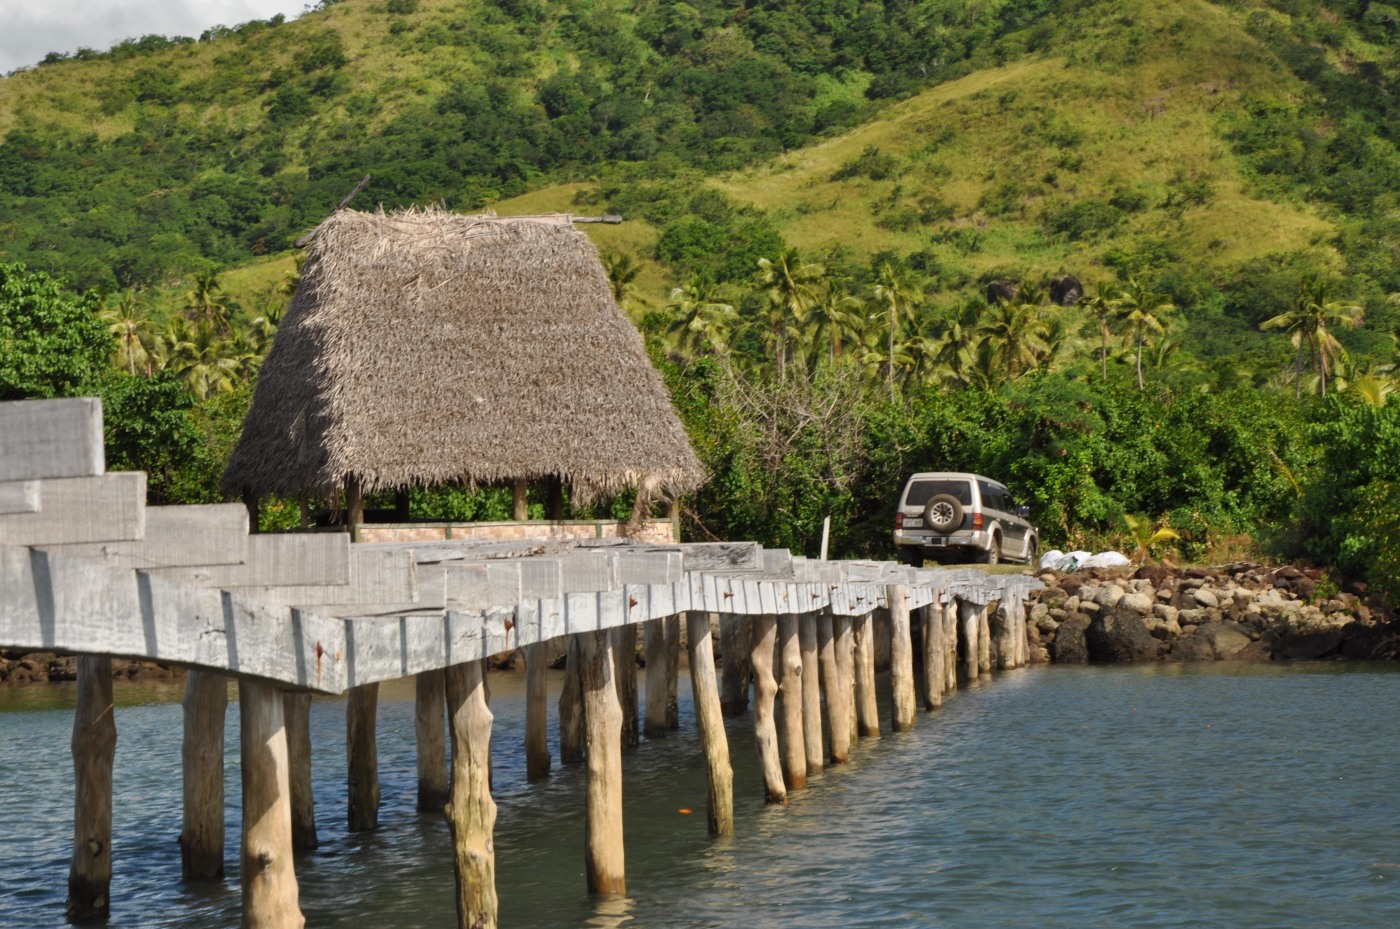 Nukubati, is a few hundred meters off-shore--You can literally drive up the pier.